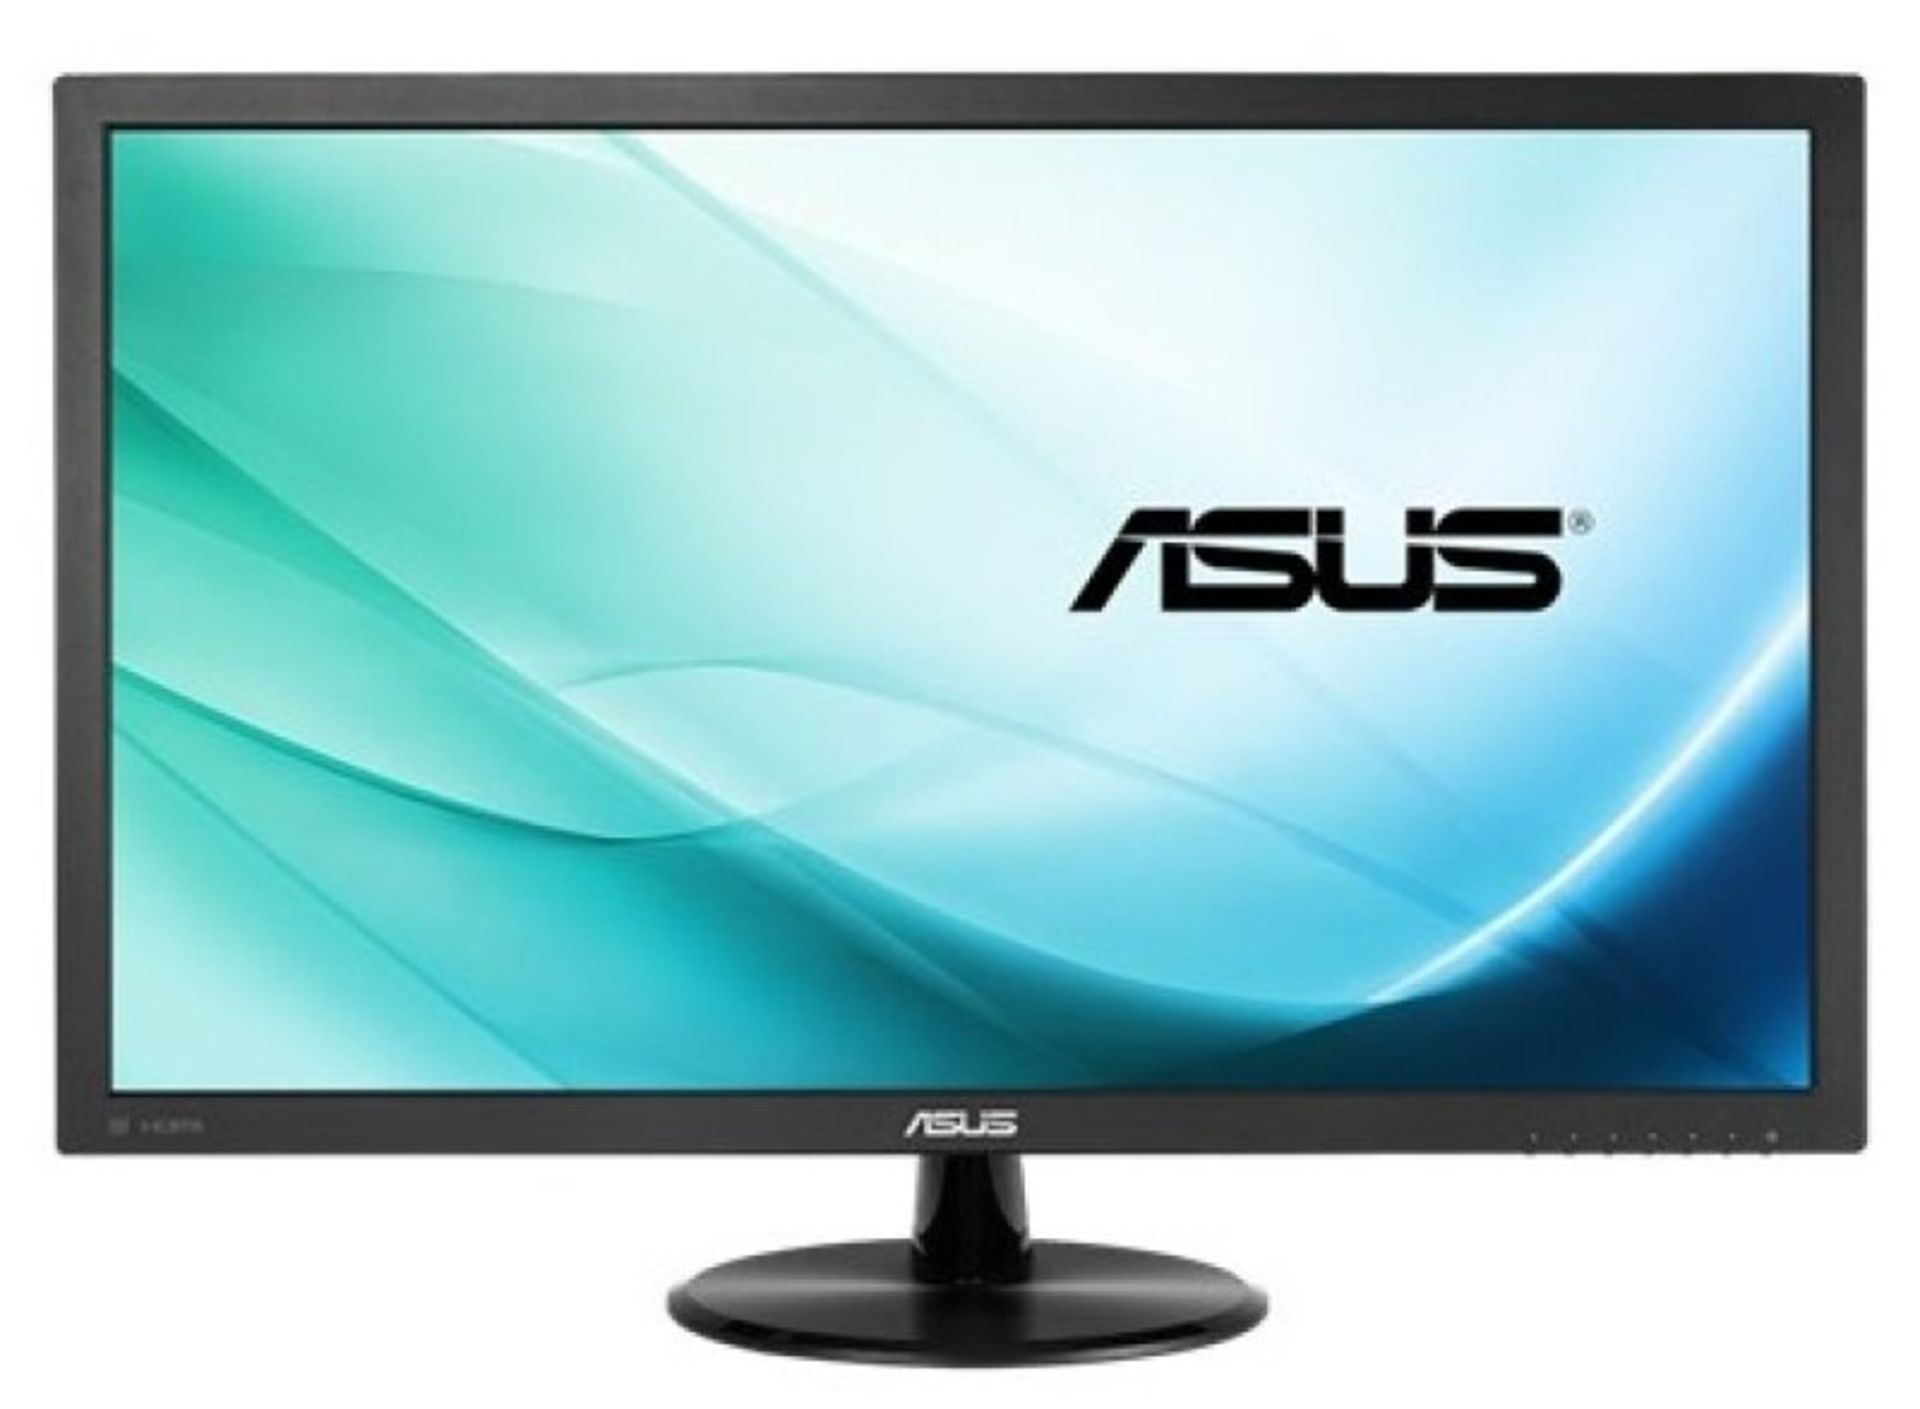 1 BOXED ASUS VP247H 23.6" FULL HD 1920 x 1080 WIDE SCREEN LCD GAMING MONITOR RRP Â£179.99 (WORKING)